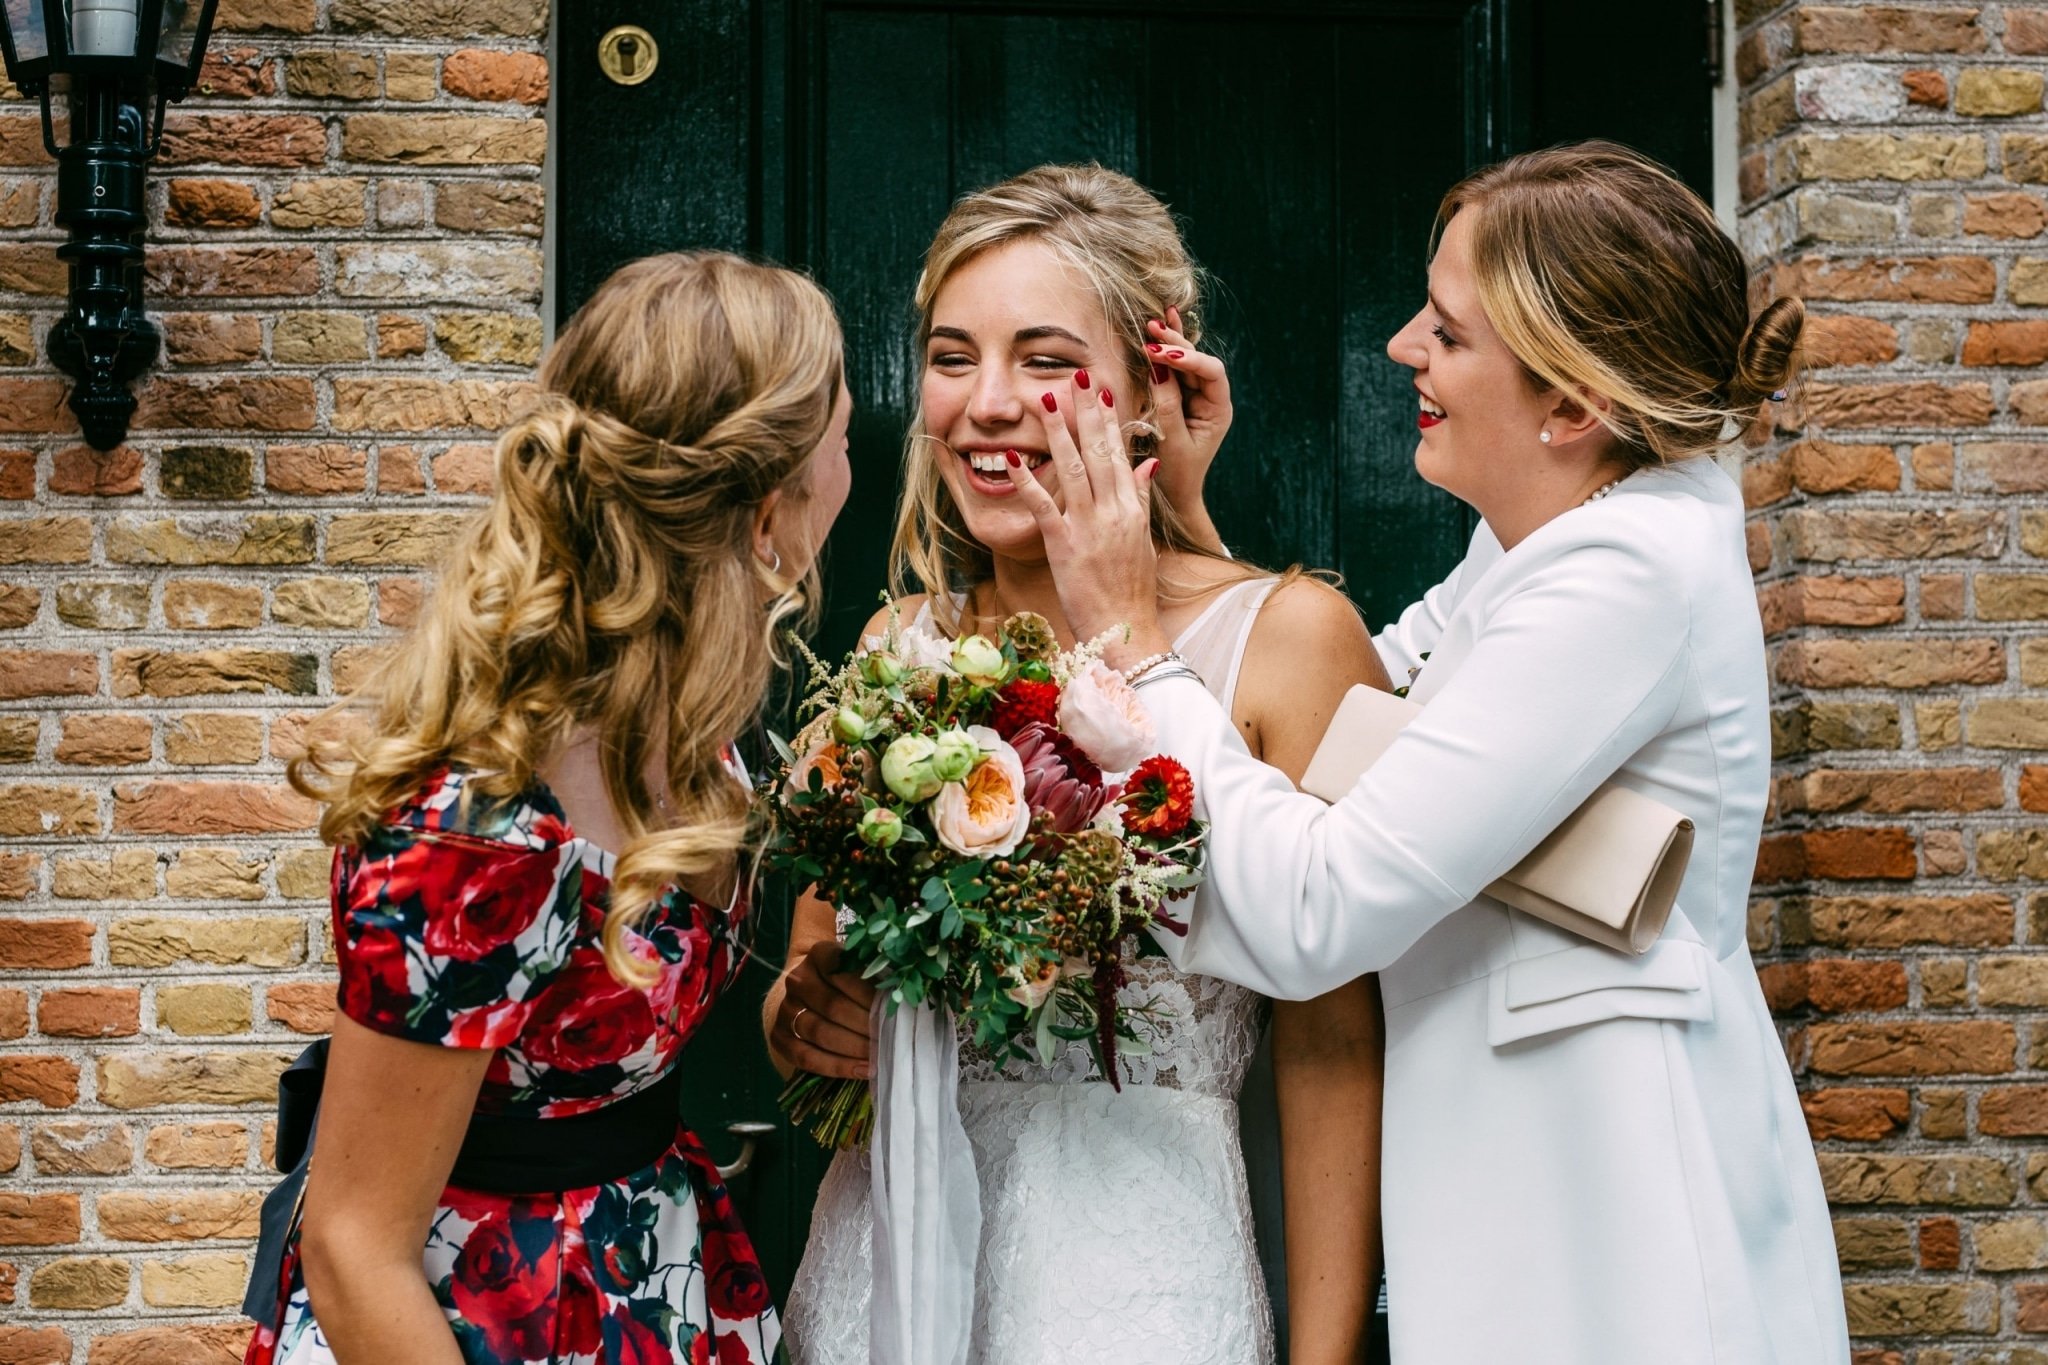 A bride and her bridesmaids kiss in front of a brick door.